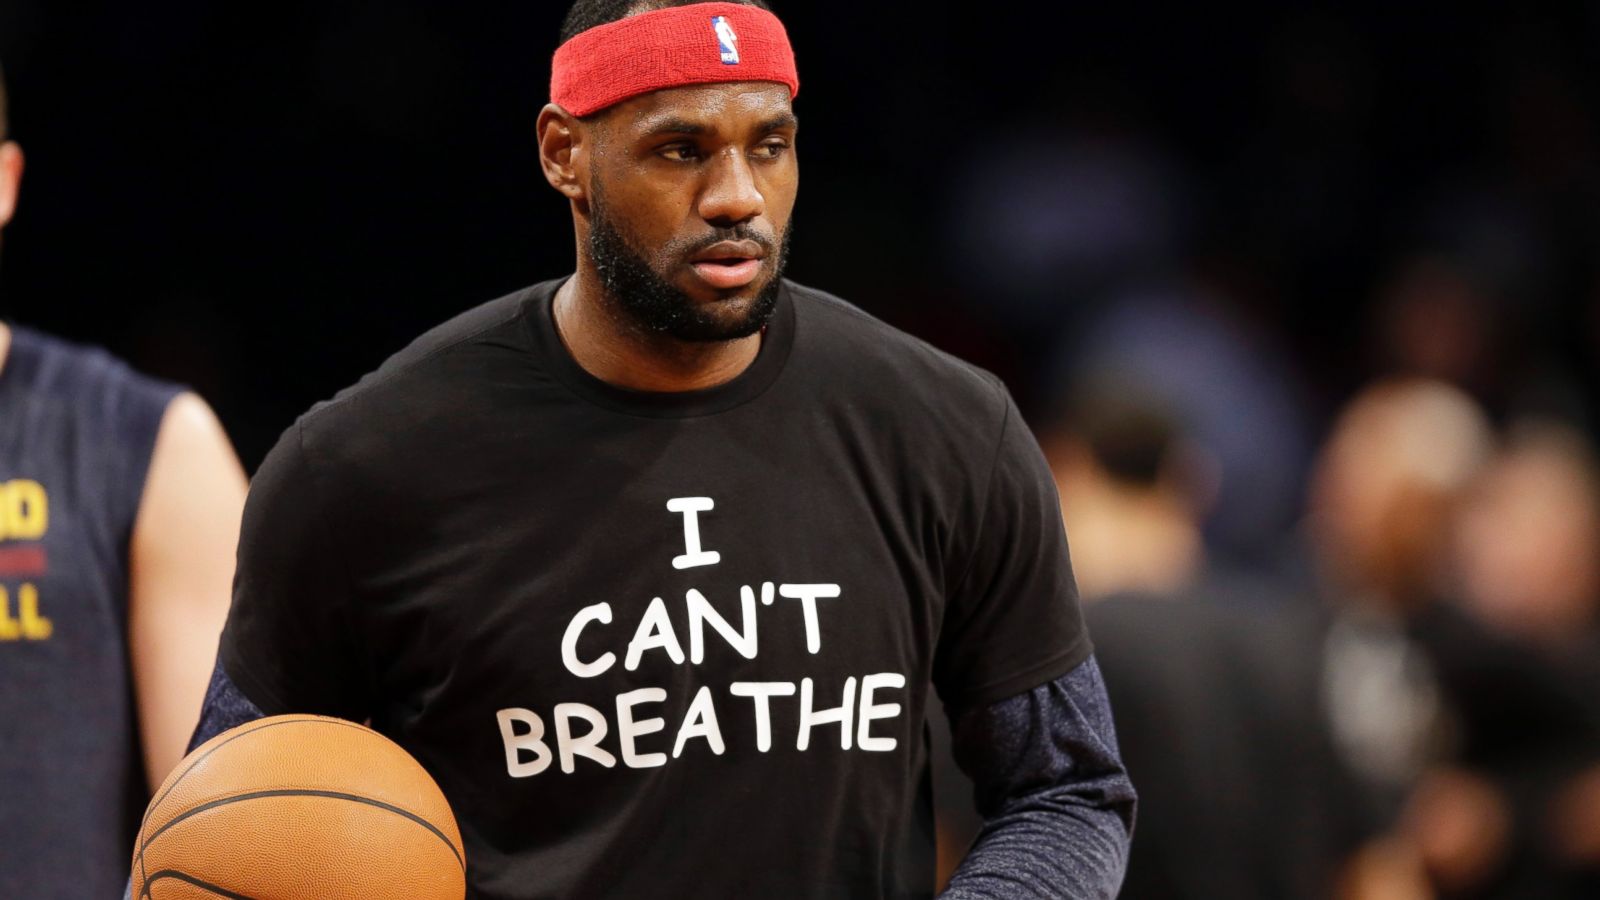 Frivillig brevpapir Forfatning How the Sports World Is Reacting to Mike Brown, Eric Garner Protests - ABC  News